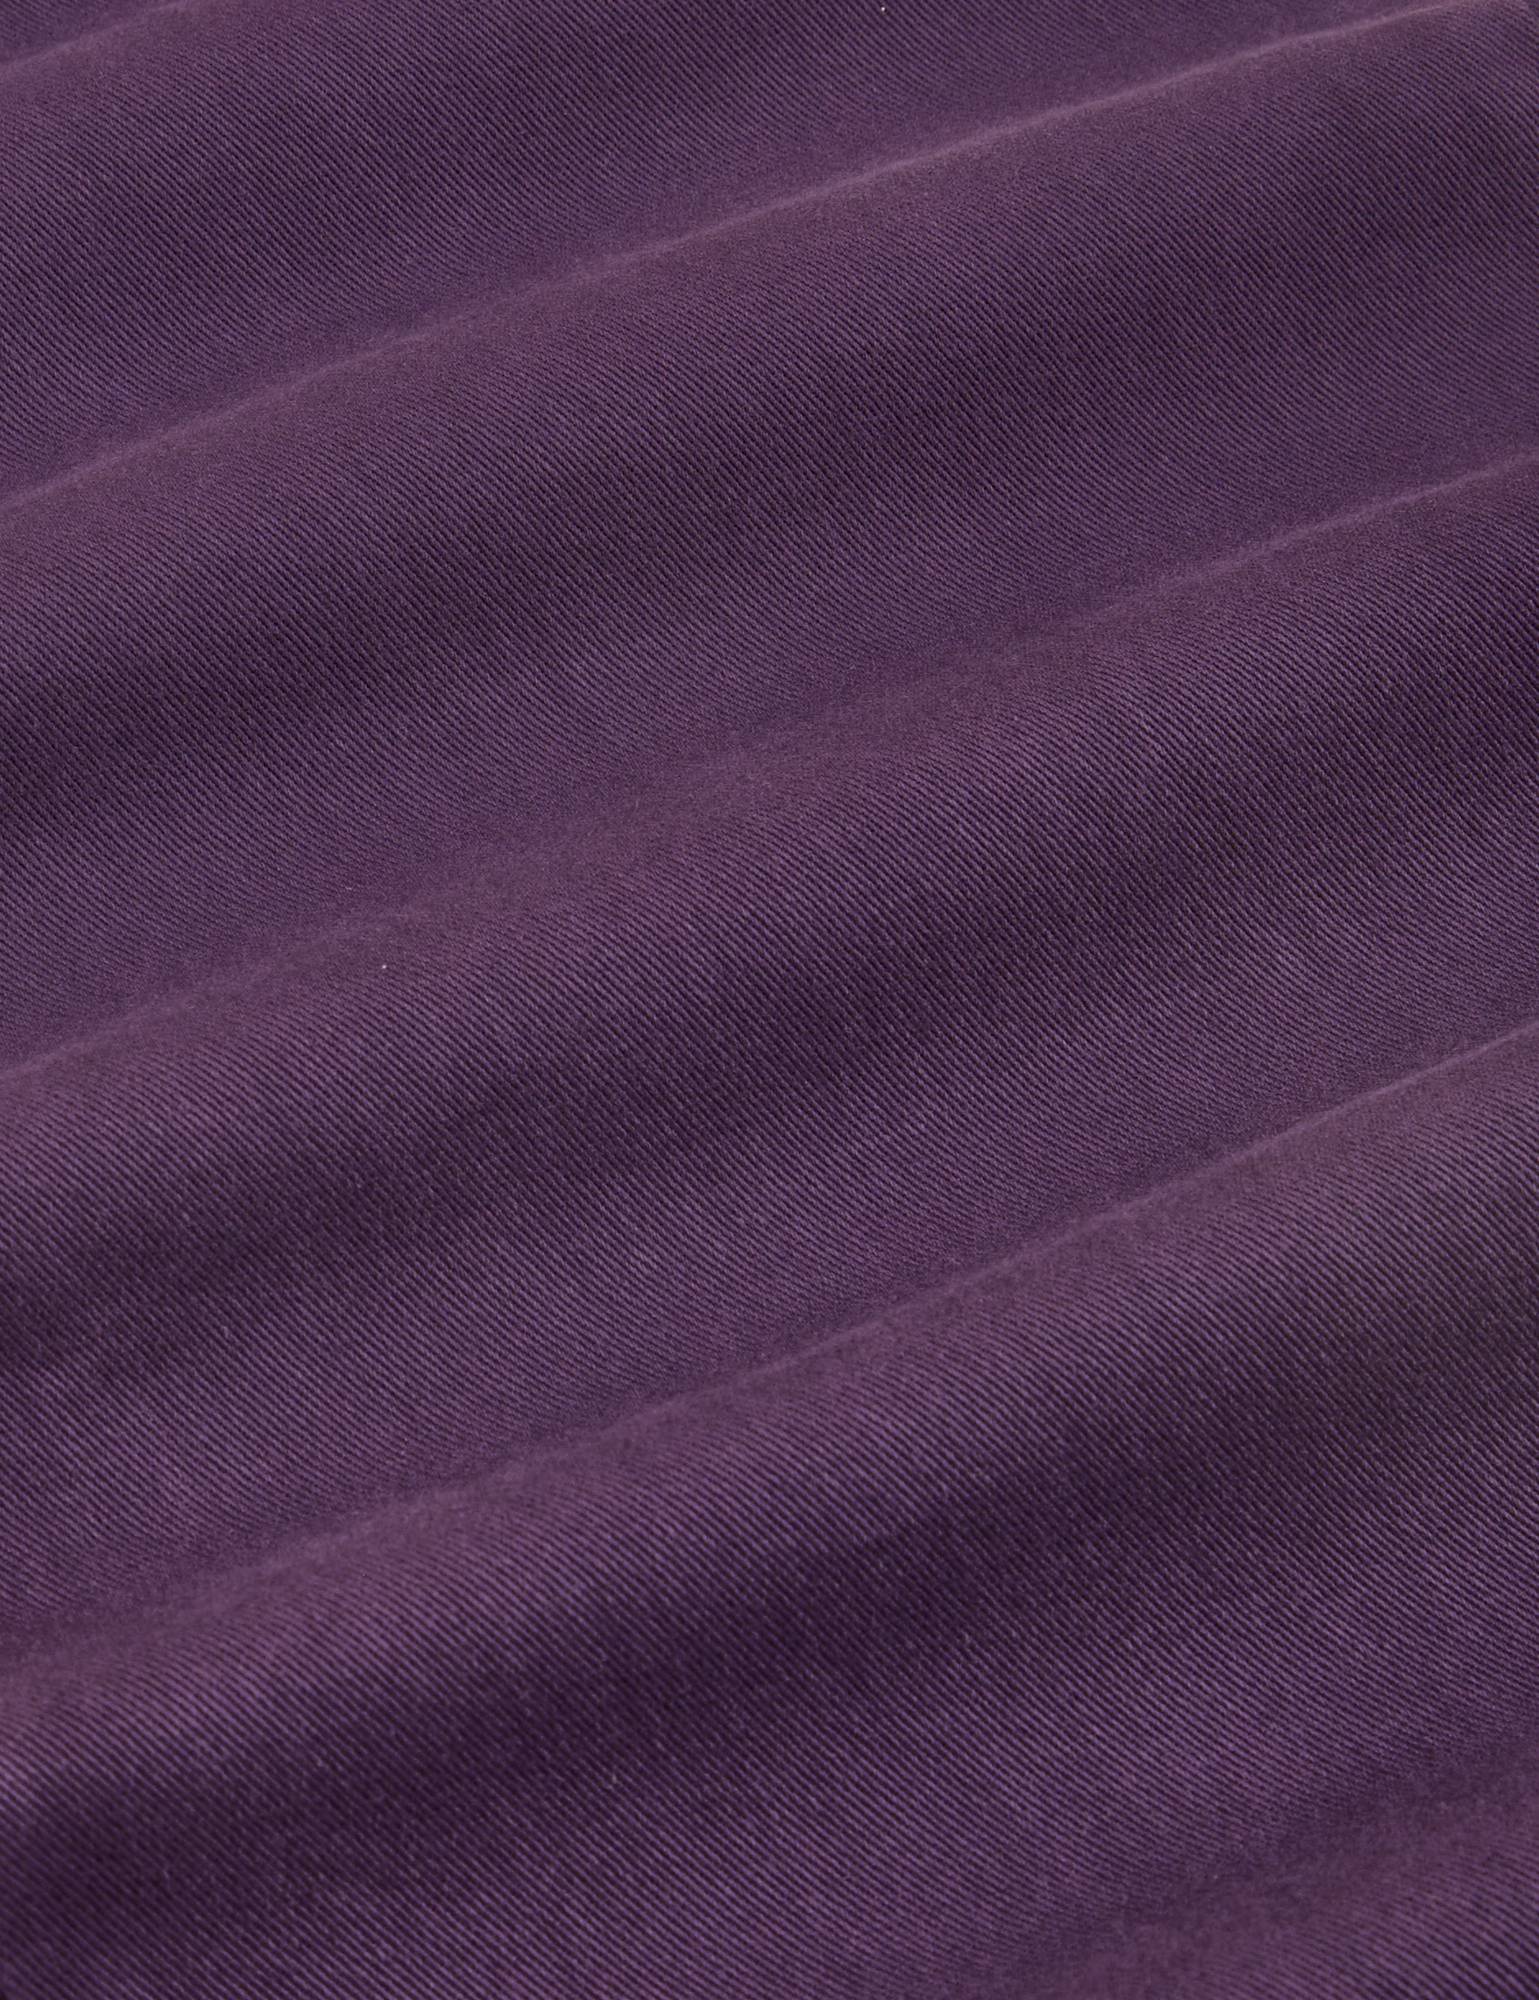 Bell Bottoms in Nebula Purple fabric detail close up